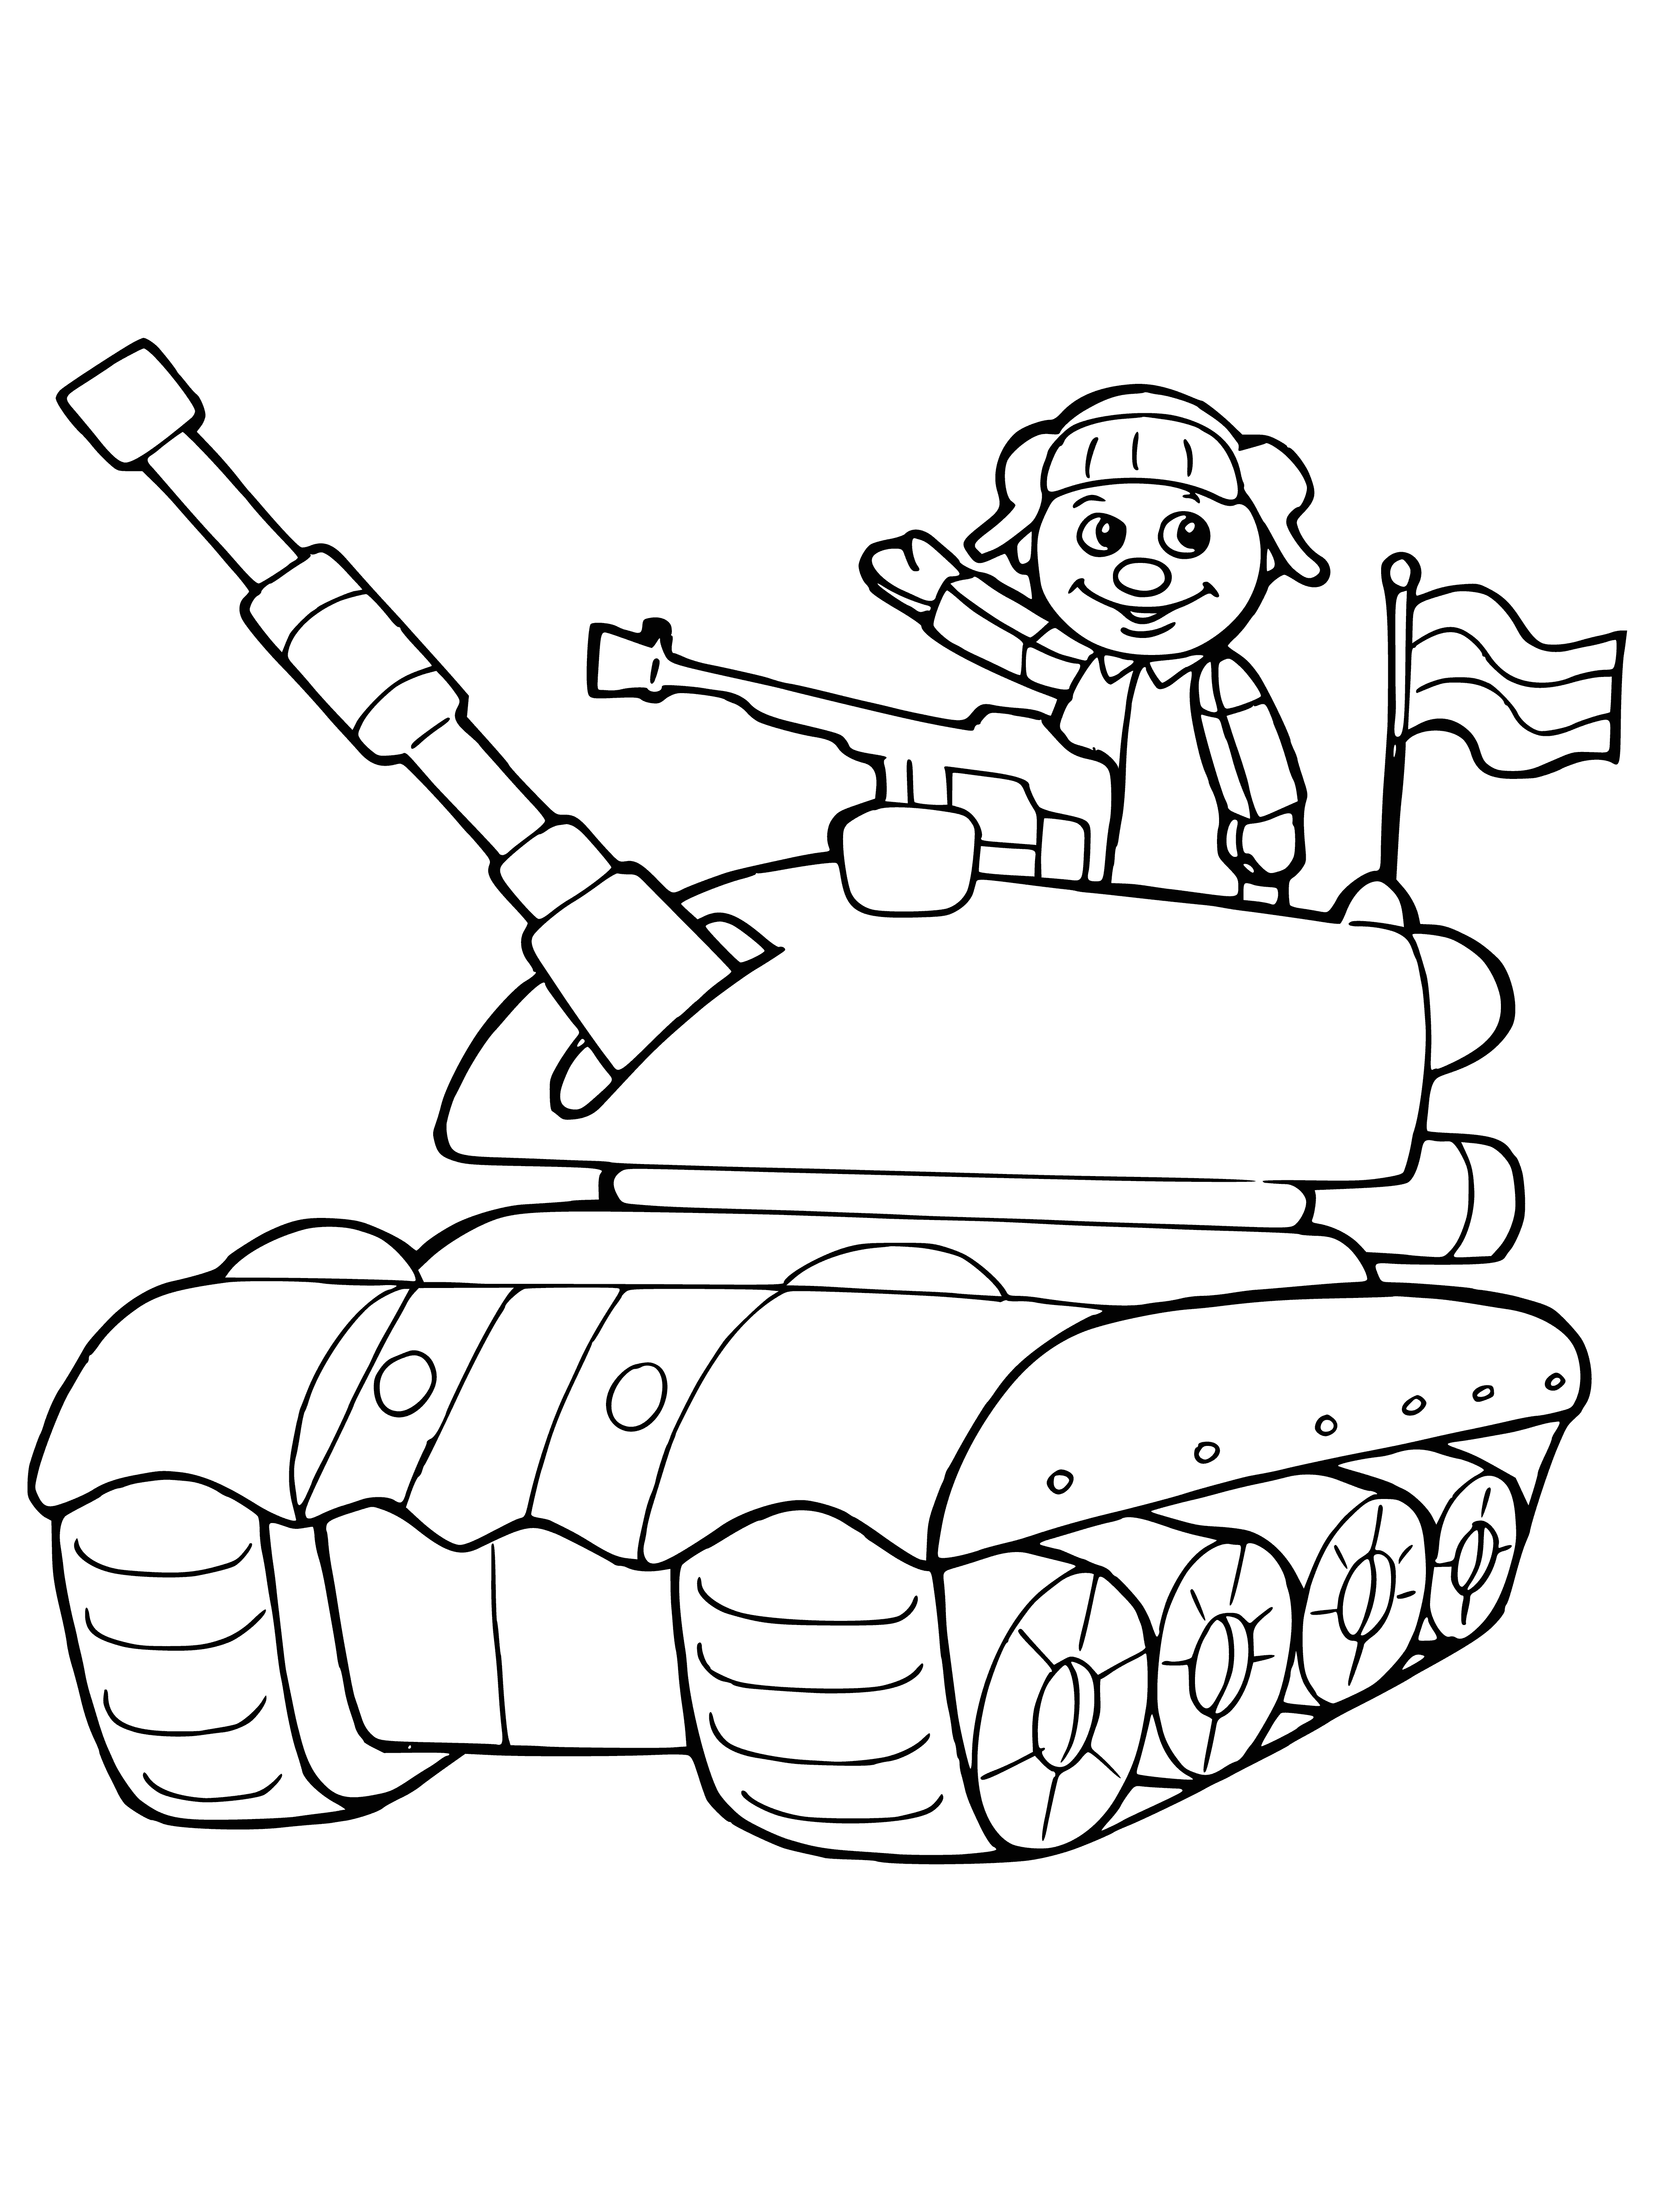 coloring page: Small, green plastic toy tank with turret & treads, 2 green soldiers standing beside it. #toytank #soldiers